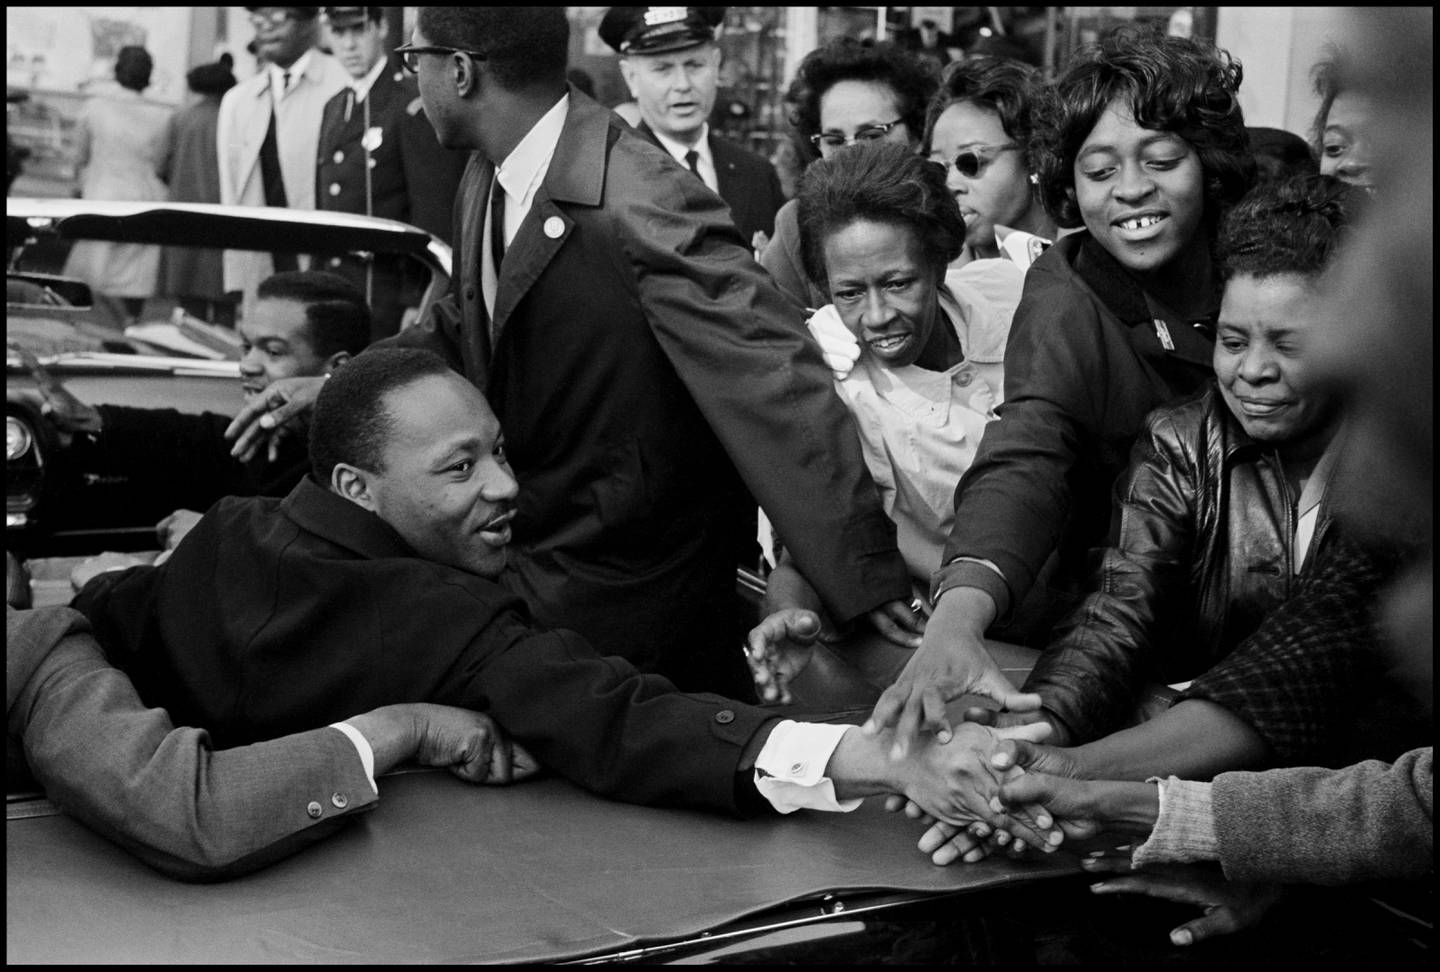 USA. Baltimore, MD. October 31, 1964. Dr. Martin Luther King, Jr. being greeted on his return to the US after receiving the Nobel Peace Prize.